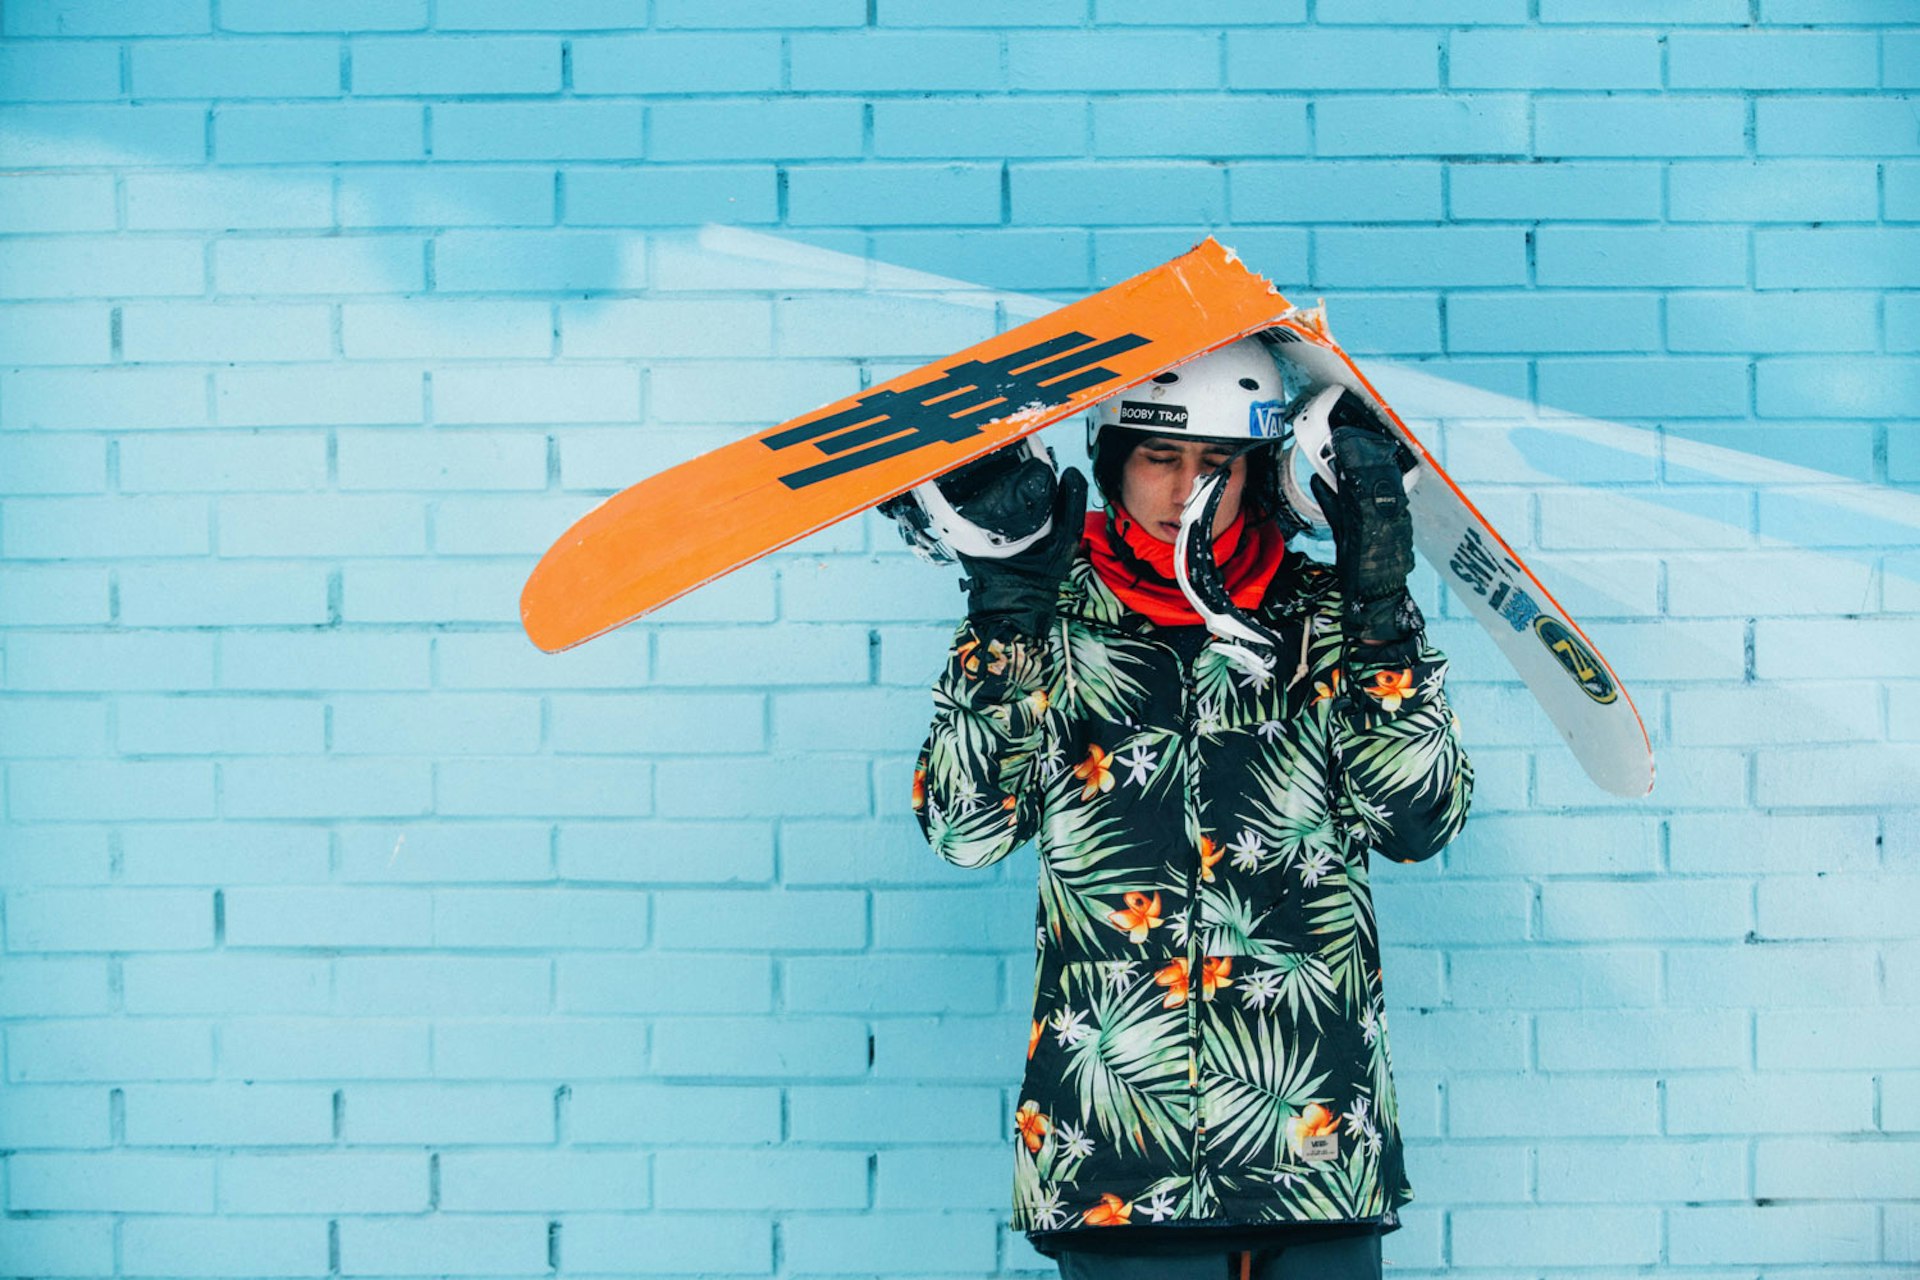 A day in the life of professional snowboarder Sparrow Knox